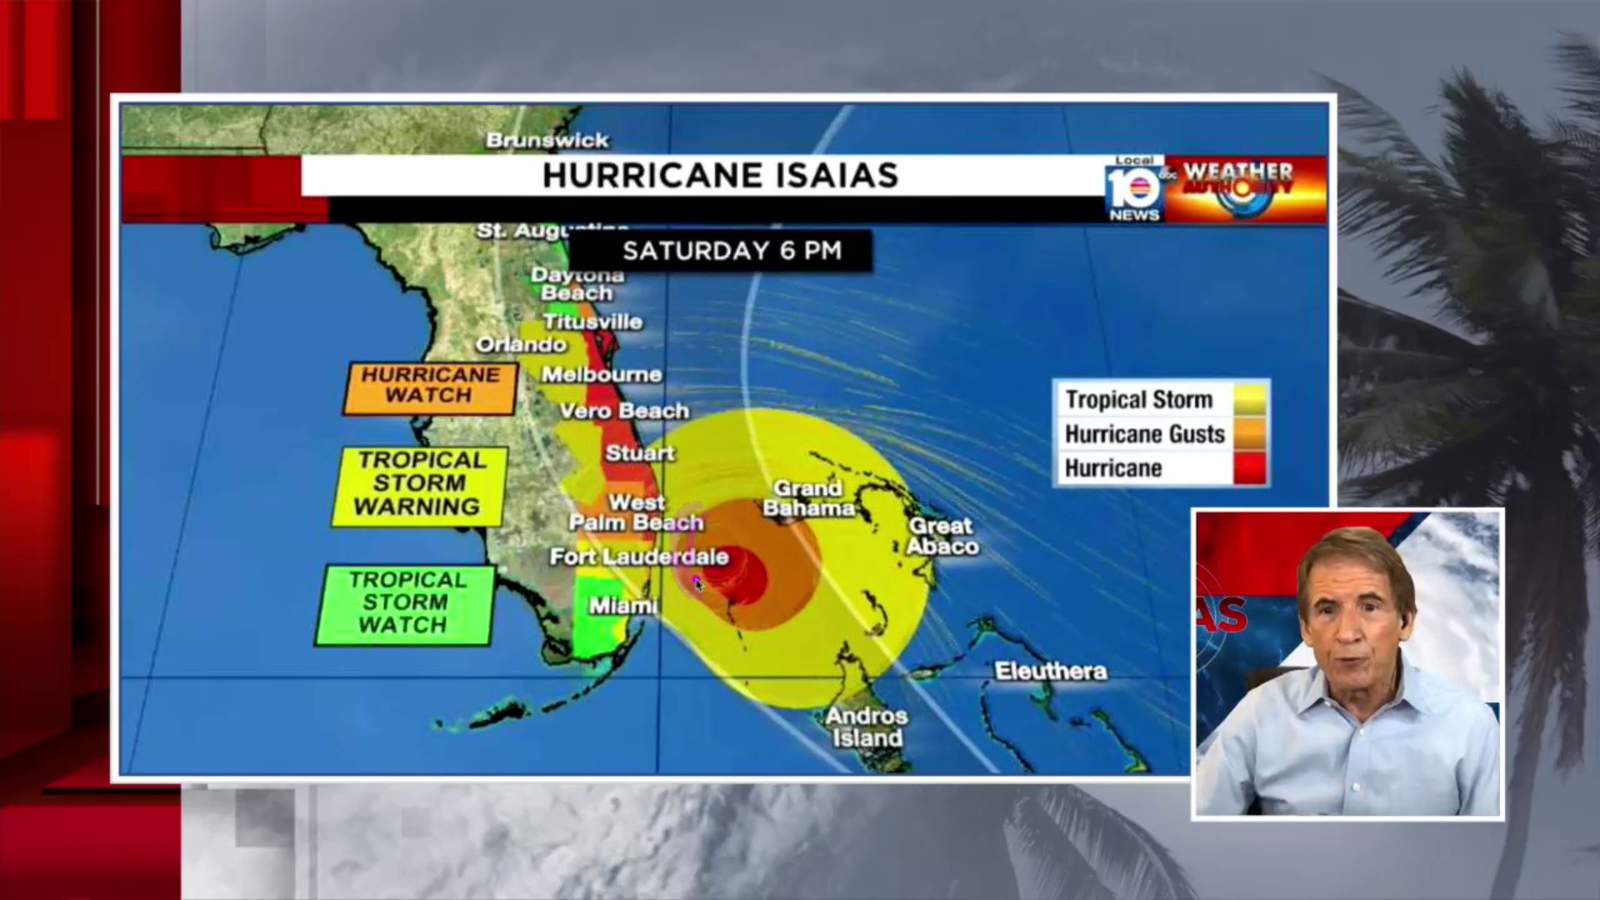 Norcross: Hurricane Isaias forecast models inch closer to Florida